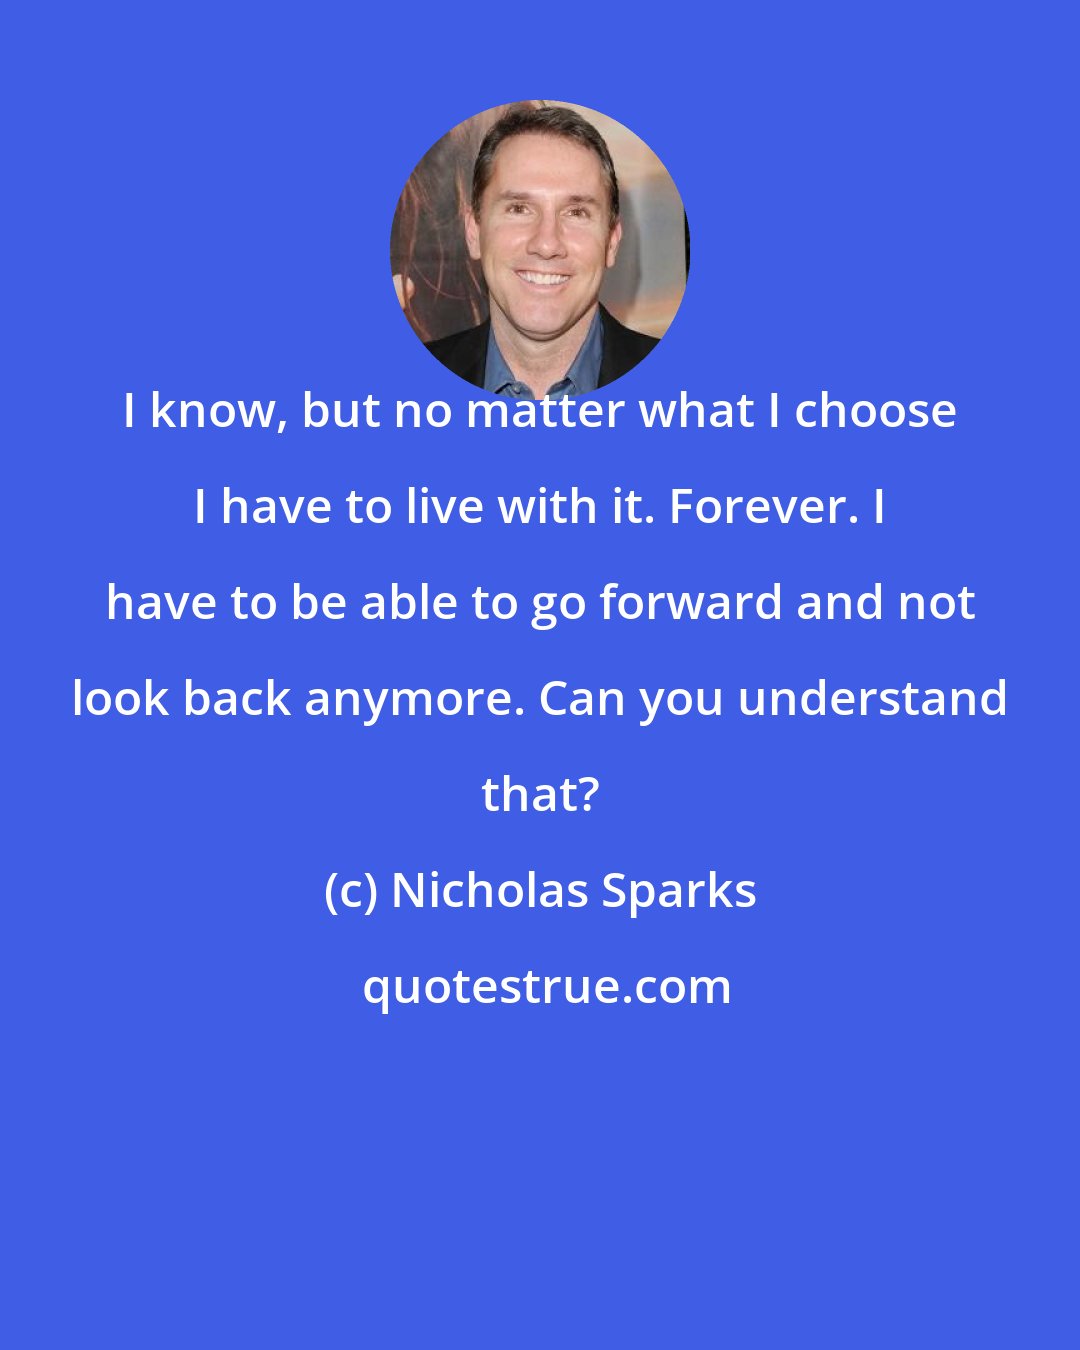 Nicholas Sparks: I know, but no matter what I choose I have to live with it. Forever. I have to be able to go forward and not look back anymore. Can you understand that?